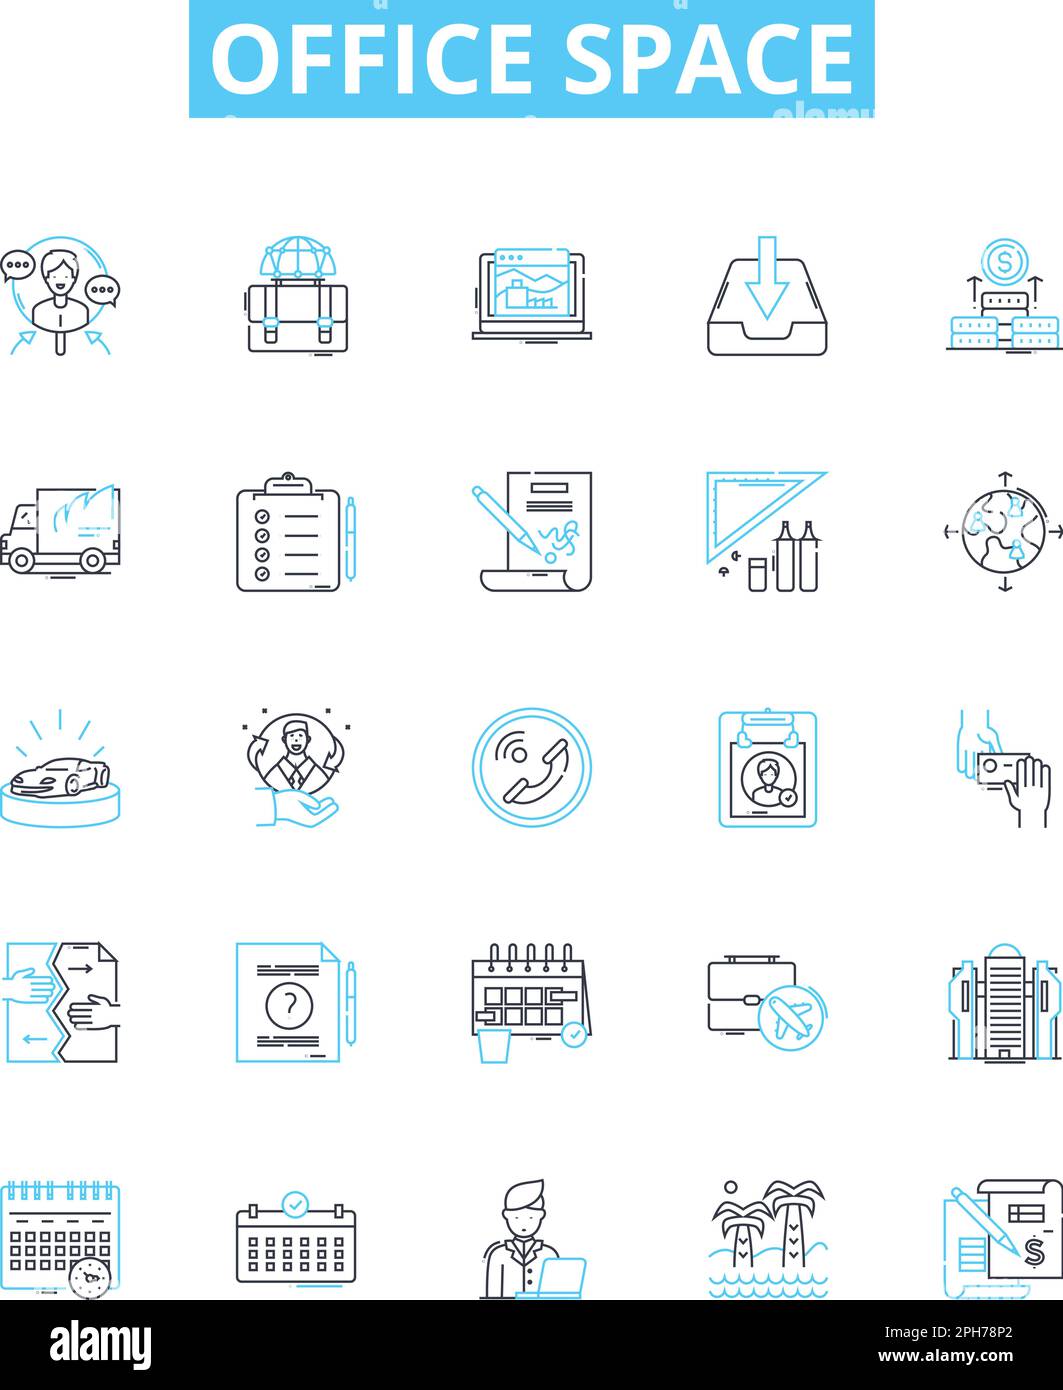 https://c8.alamy.com/comp/2PH78P2/office-space-vector-line-icons-set-workplace-cubicle-desk-meeting-workspace-file-chair-illustration-outline-concept-symbols-and-signs-2PH78P2.jpg